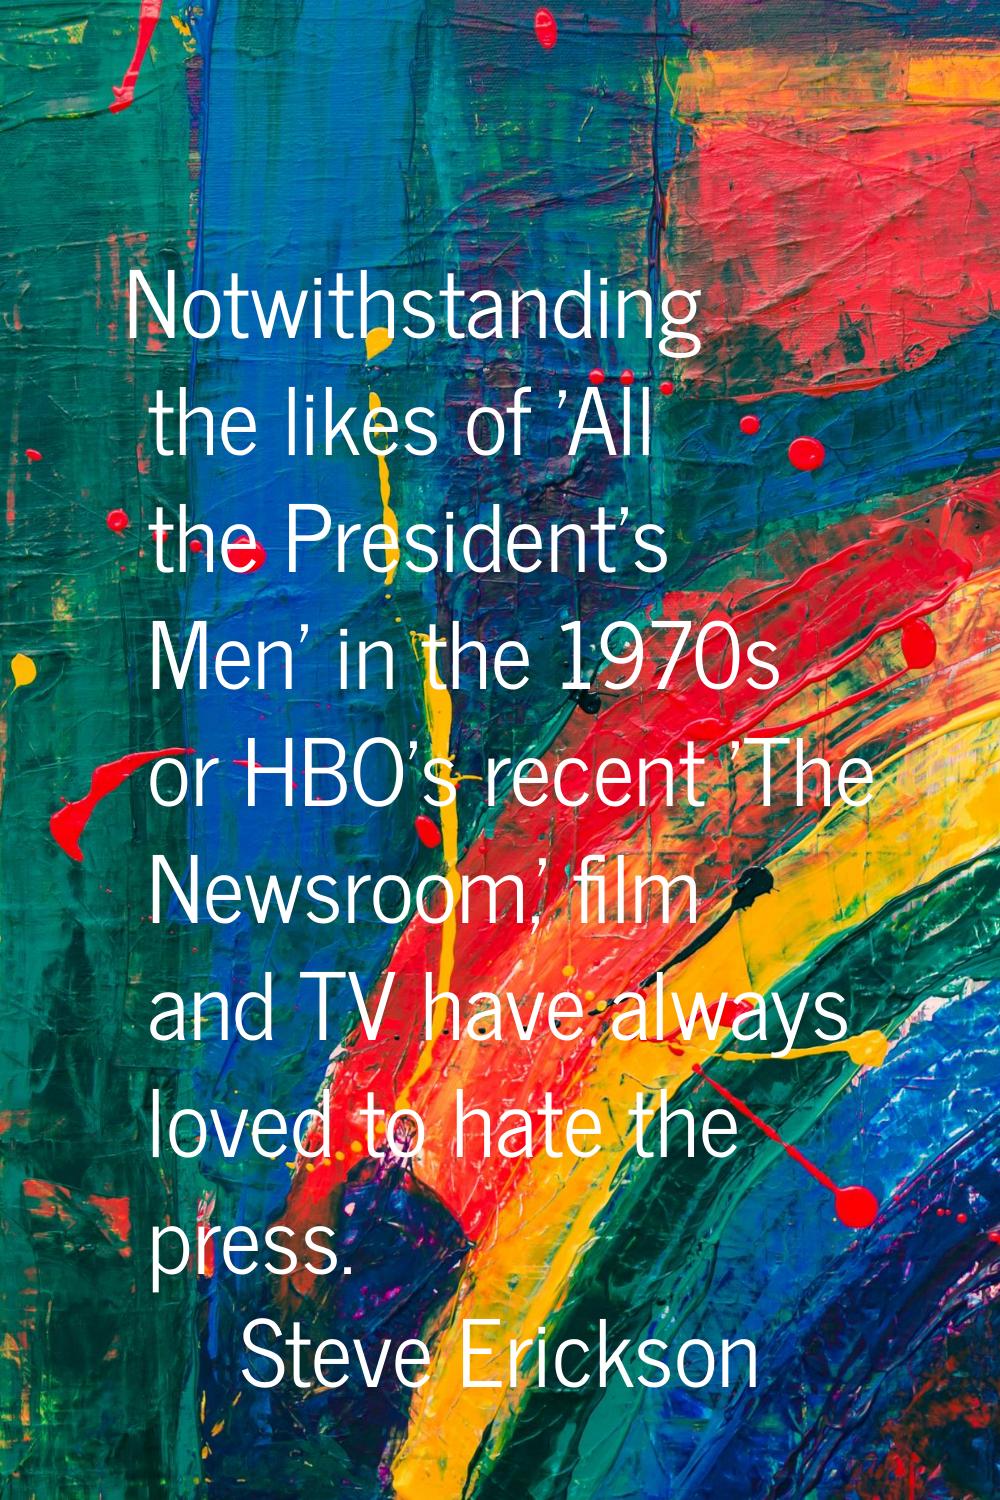 Notwithstanding the likes of 'All the President's Men' in the 1970s or HBO's recent 'The Newsroom,'